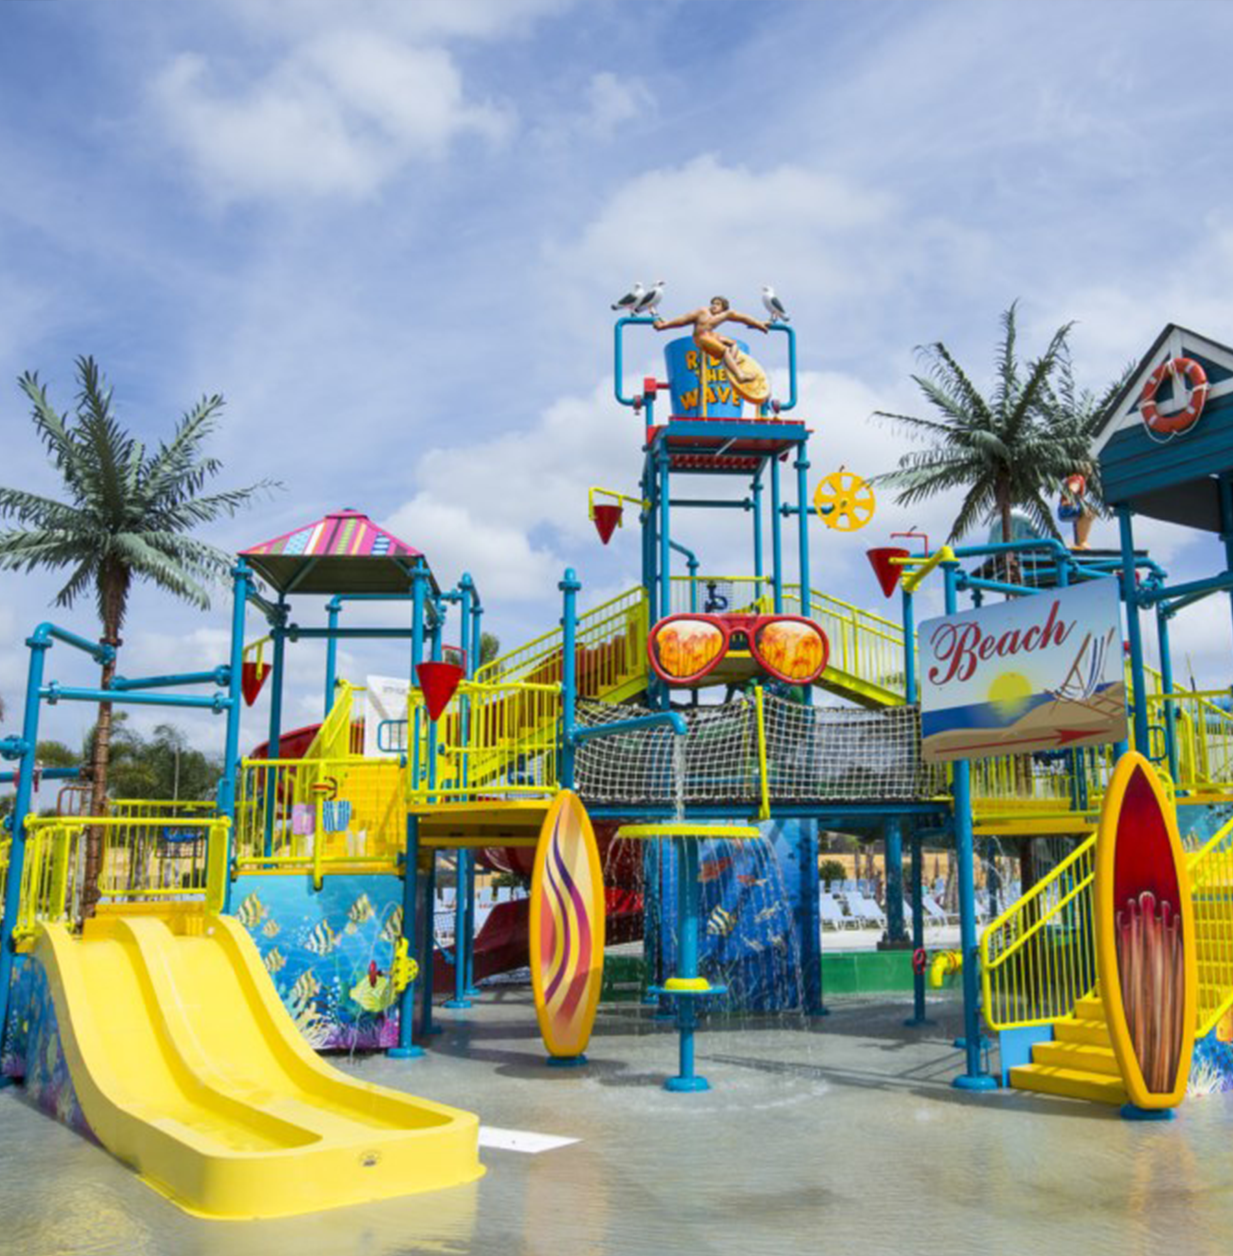 A waterpark with stairs, slides, bridges, sprinklers, and large buckets